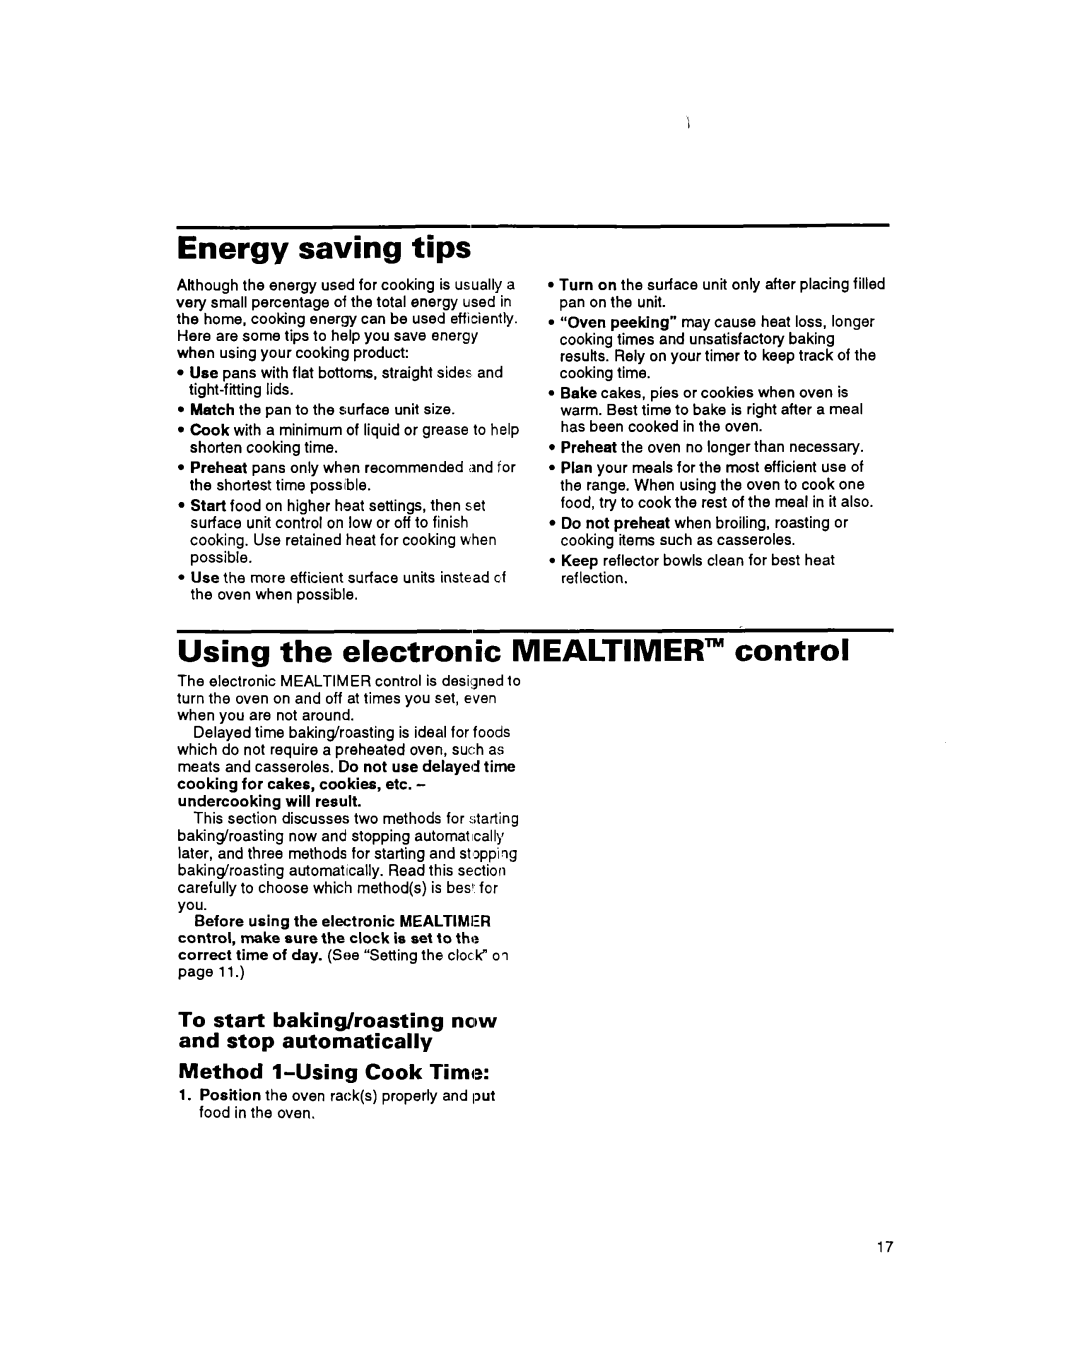 Whirlpool RS6755XB, RS675PXB warranty Energy saving tips, Using the electronic MEALTIMERm control, Method l-UsingCook Time 